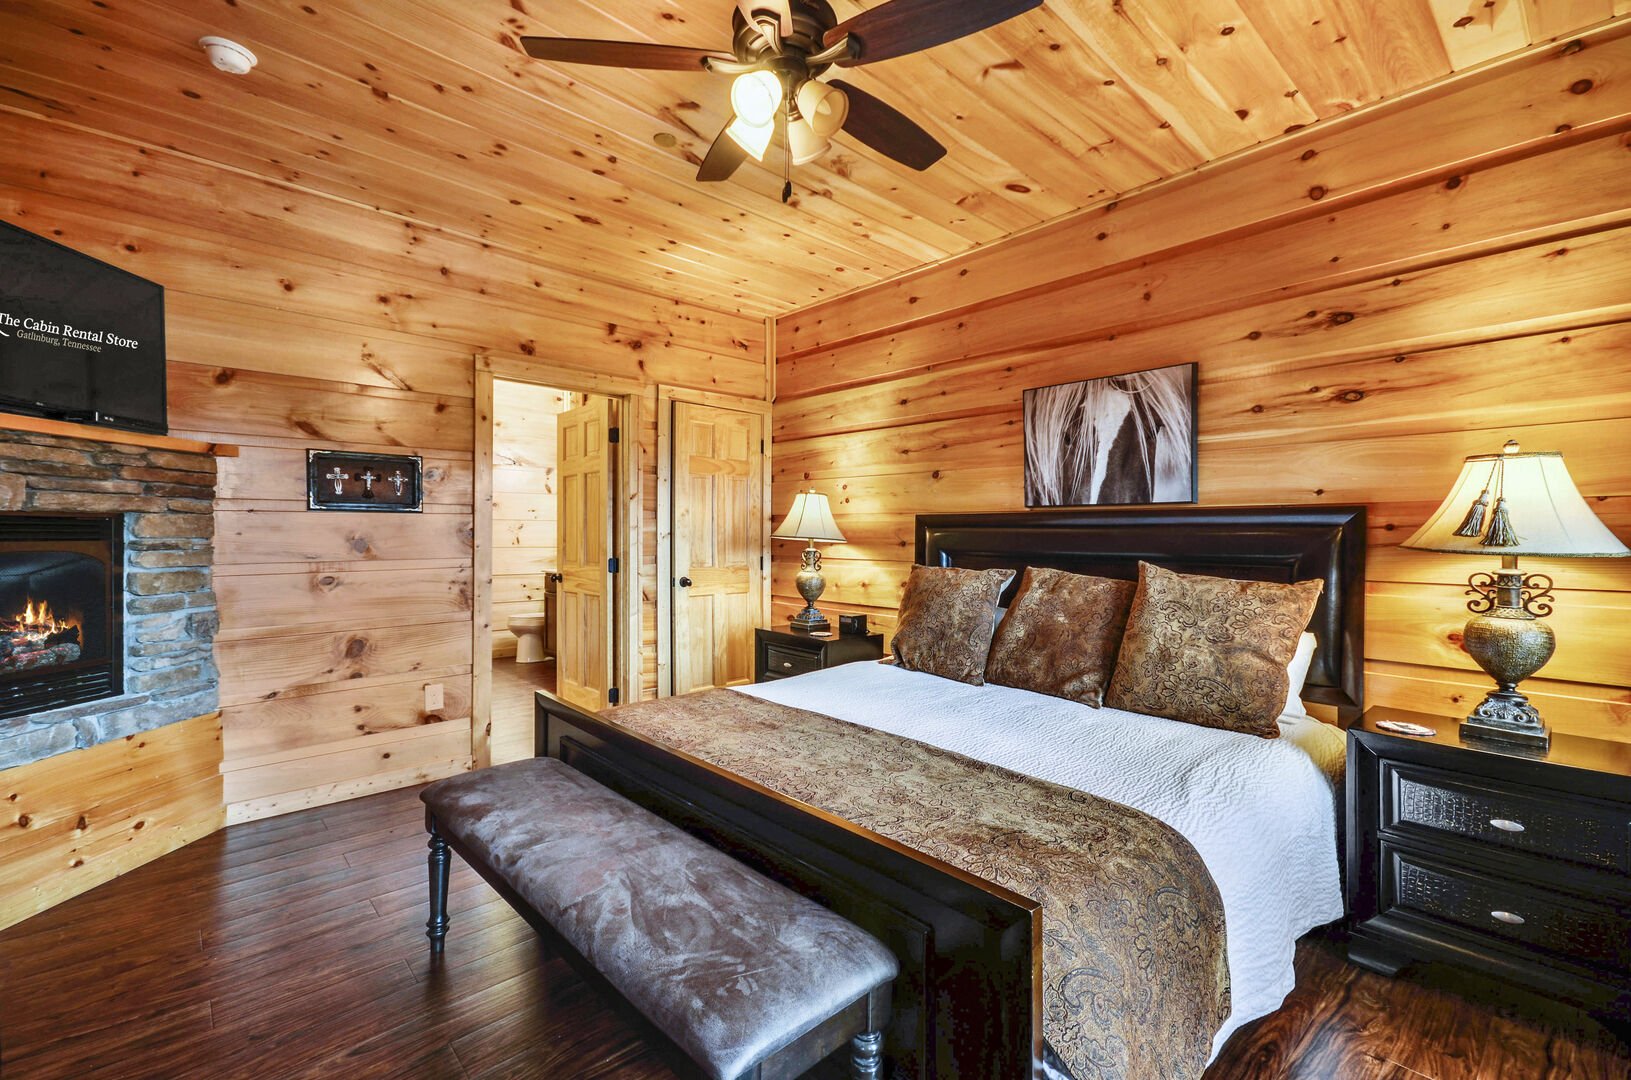 Fireplace, large bed, and nightstands in a bedroom of this Vacation rental near Gatlinburg TN.